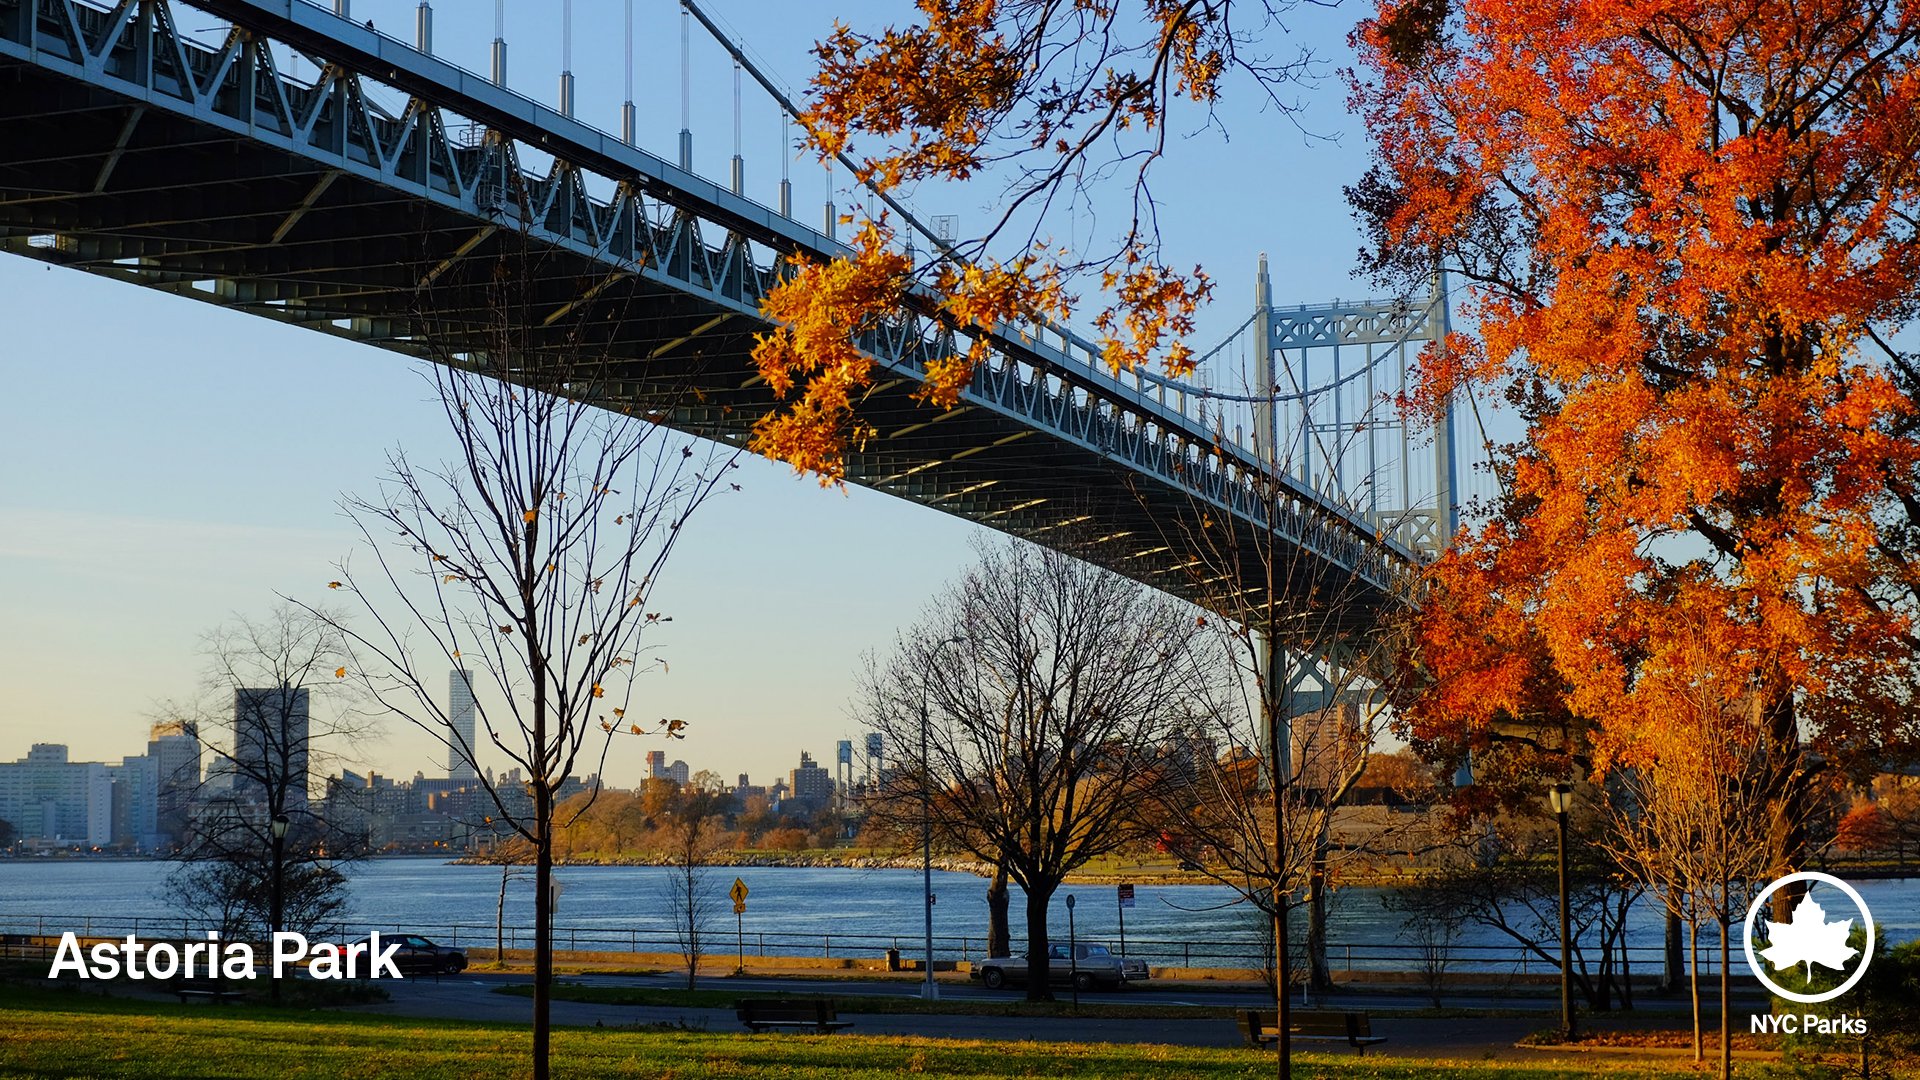 View of Astoria Park with fall foliage and bridge